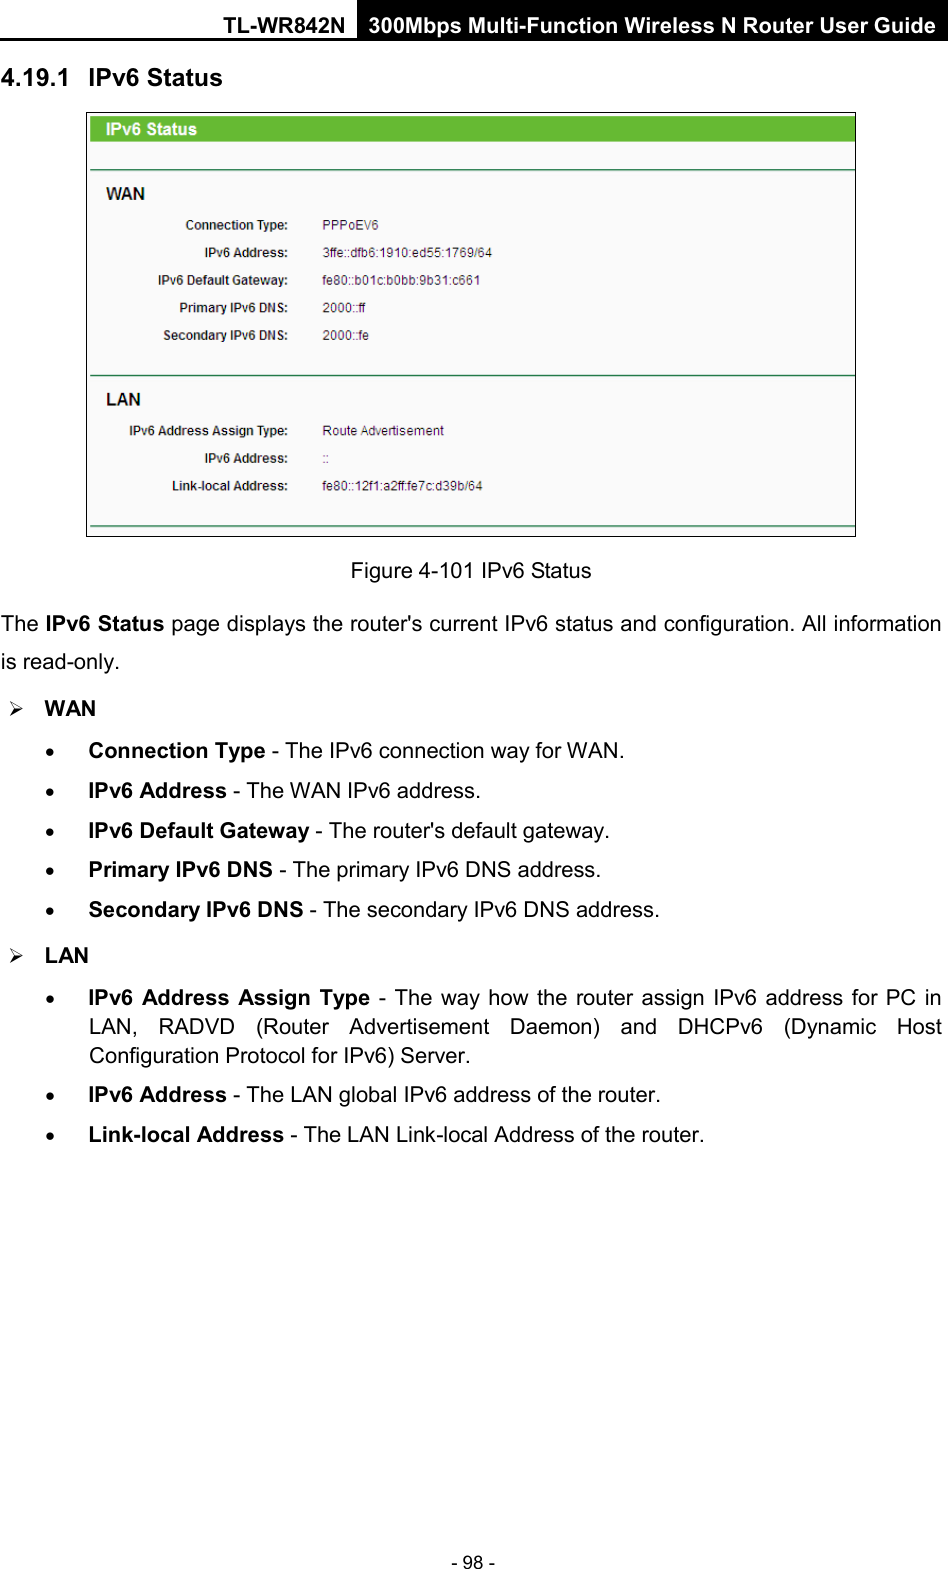 TL-WR842N 300Mbps Multi-Function Wireless N Router User Guide  - 98 - 4.19.1 IPv6 Status  Figure 4-101 IPv6 Status The IPv6 Status page displays the router&apos;s current IPv6 status and configuration. All information is read-only.    WAN   • Connection Type - The IPv6 connection way for WAN. • IPv6 Address - The WAN IPv6 address. • IPv6 Default Gateway - The router&apos;s default gateway. • Primary IPv6 DNS - The primary IPv6 DNS address. • Secondary IPv6 DNS - The secondary IPv6 DNS address.  LAN • IPv6 Address Assign Type  - The way how the router assign IPv6 address for PC in LAN, RADVD (Router Advertisement Daemon) and DHCPv6 (Dynamic Host Configuration Protocol for IPv6) Server. • IPv6 Address - The LAN global IPv6 address of the router. • Link-local Address - The LAN Link-local Address of the router. 